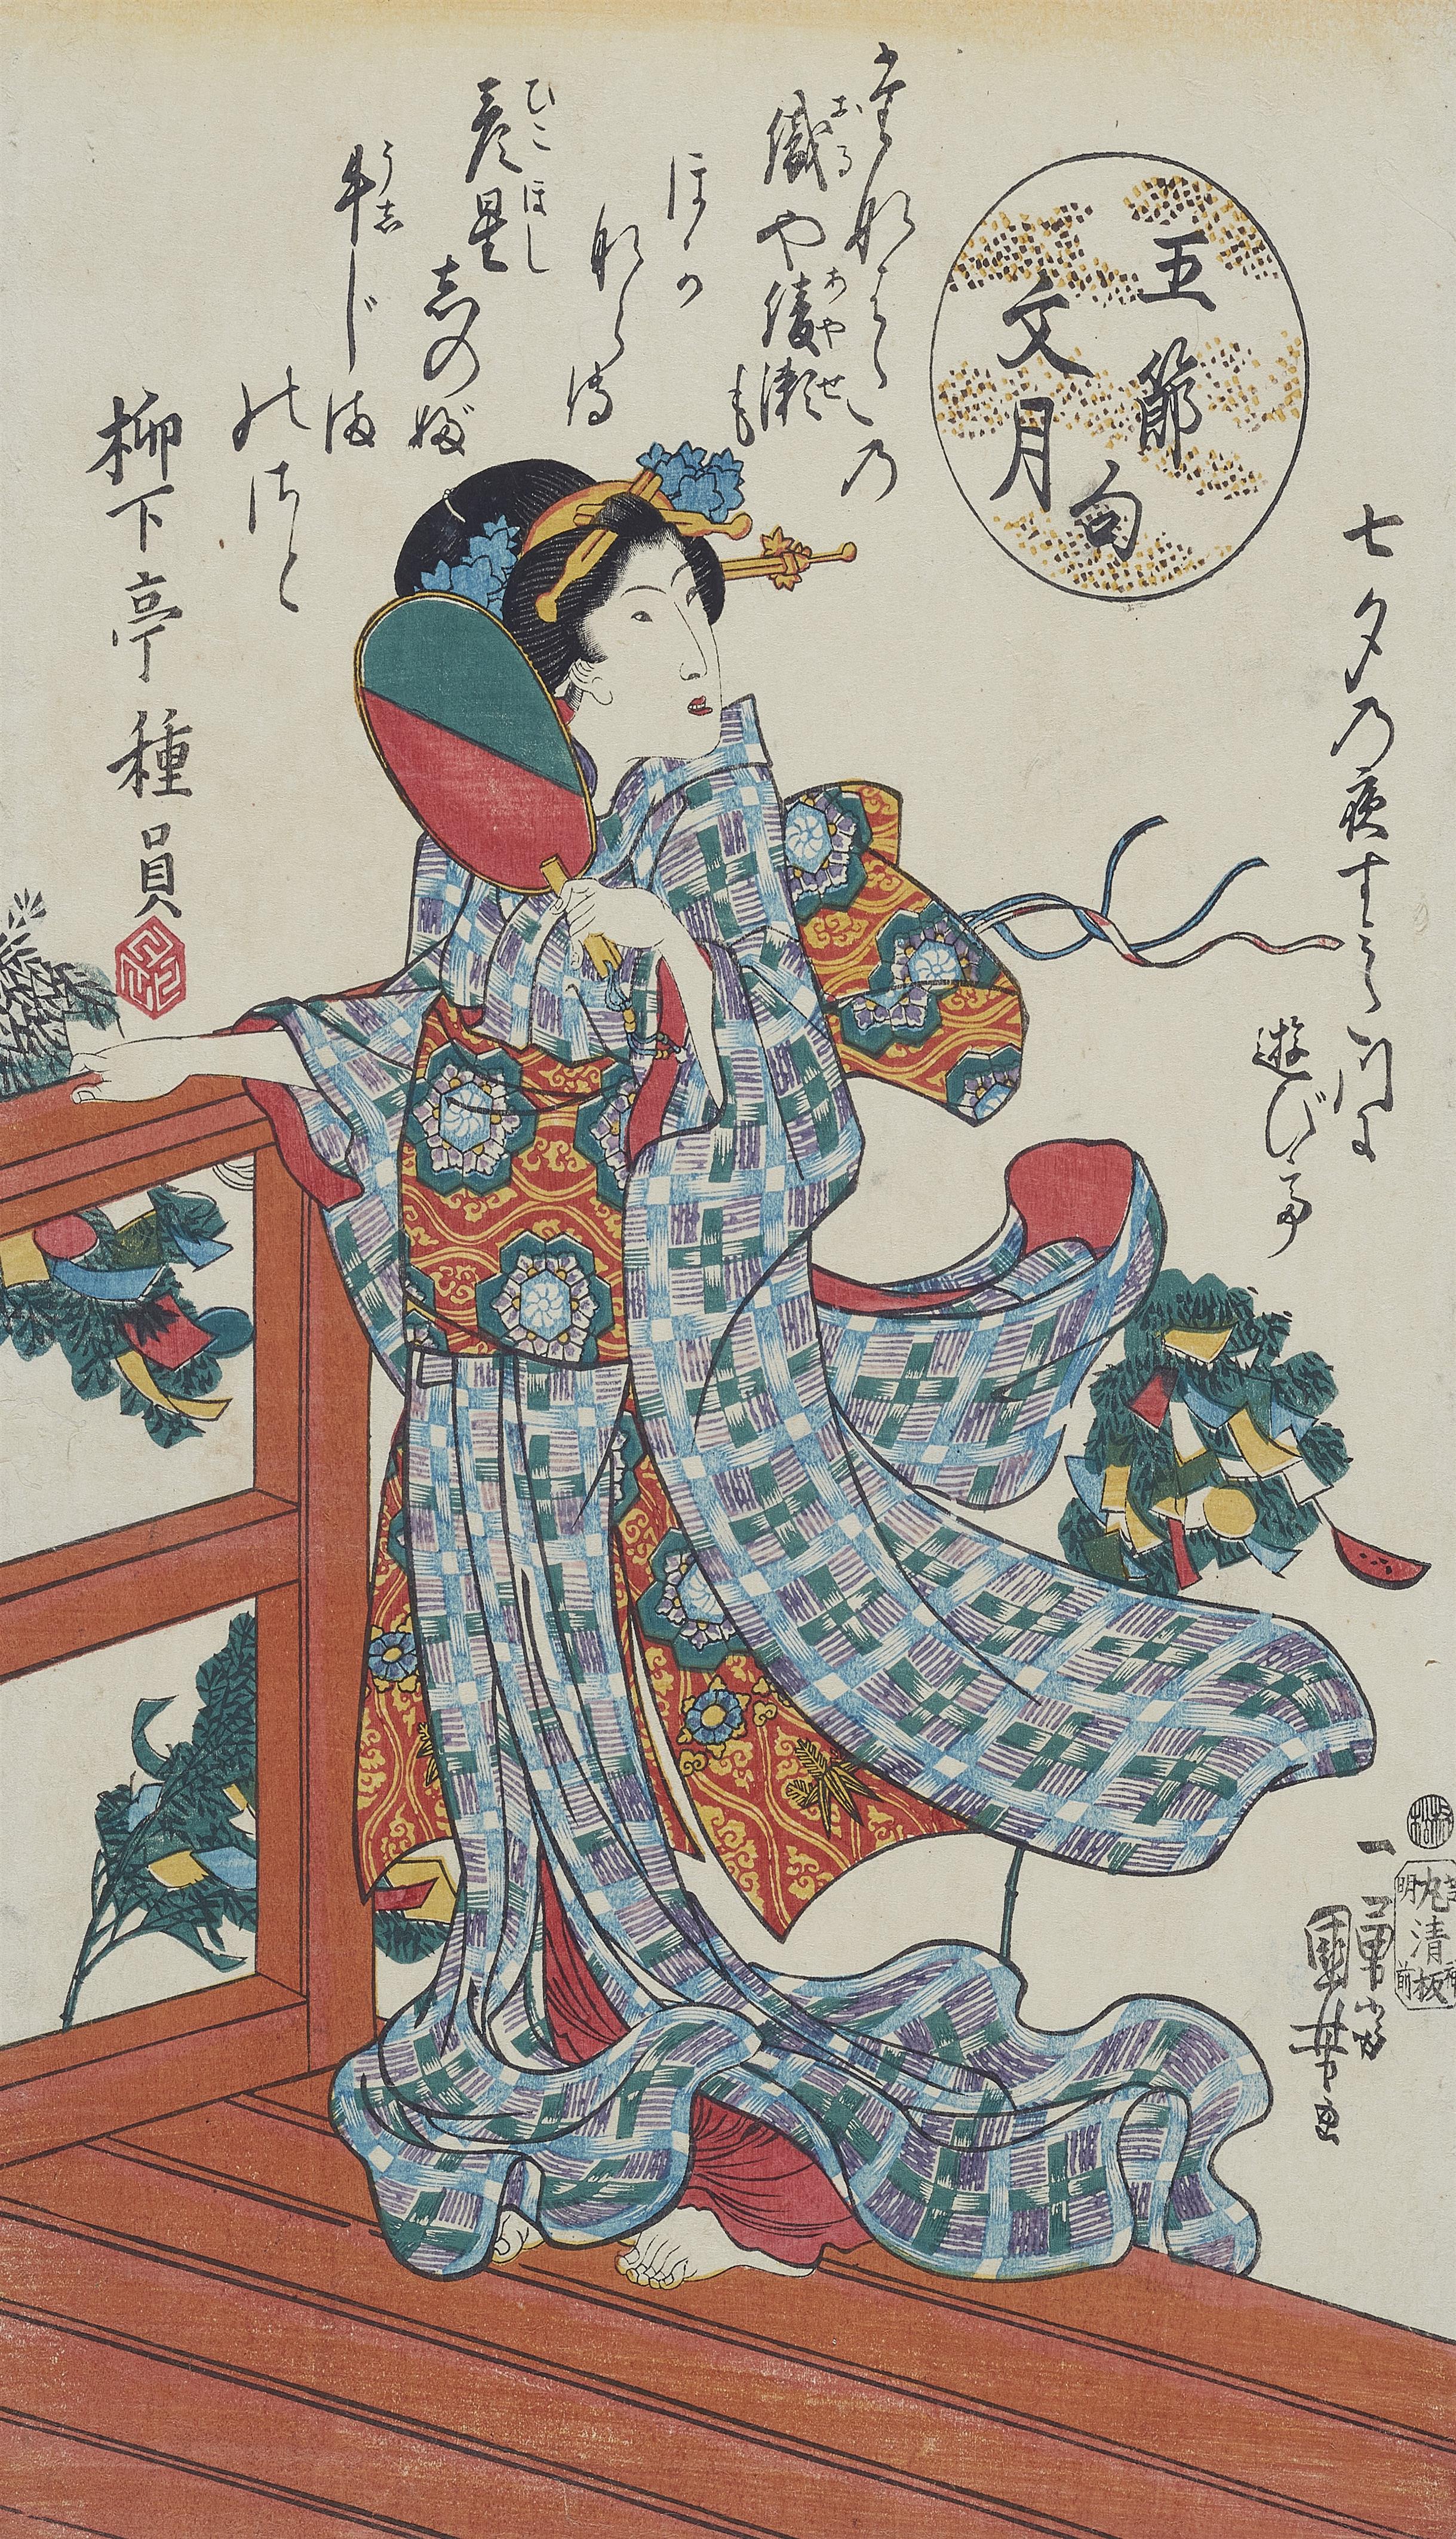 Utagawa Kuniyoshi - A young woman with fan on a roof, surrounded by Tanabata decorations - image-1